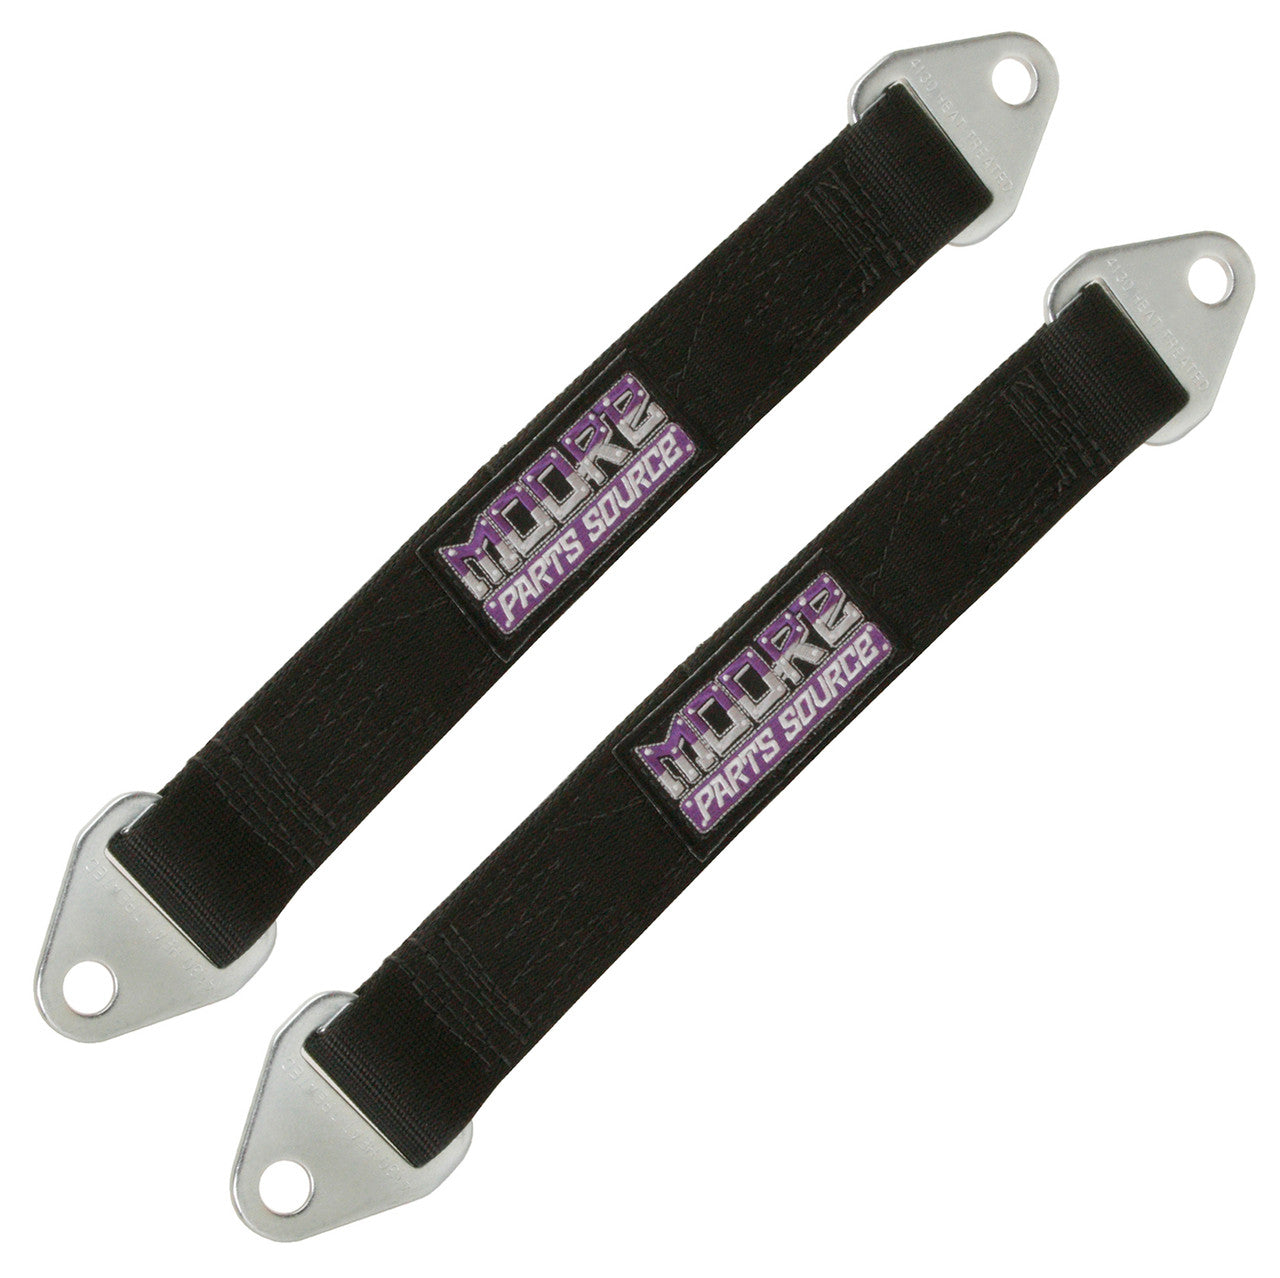 16 Inch USA Made Off-Road Suspension Limit Straps, Sold As Pair